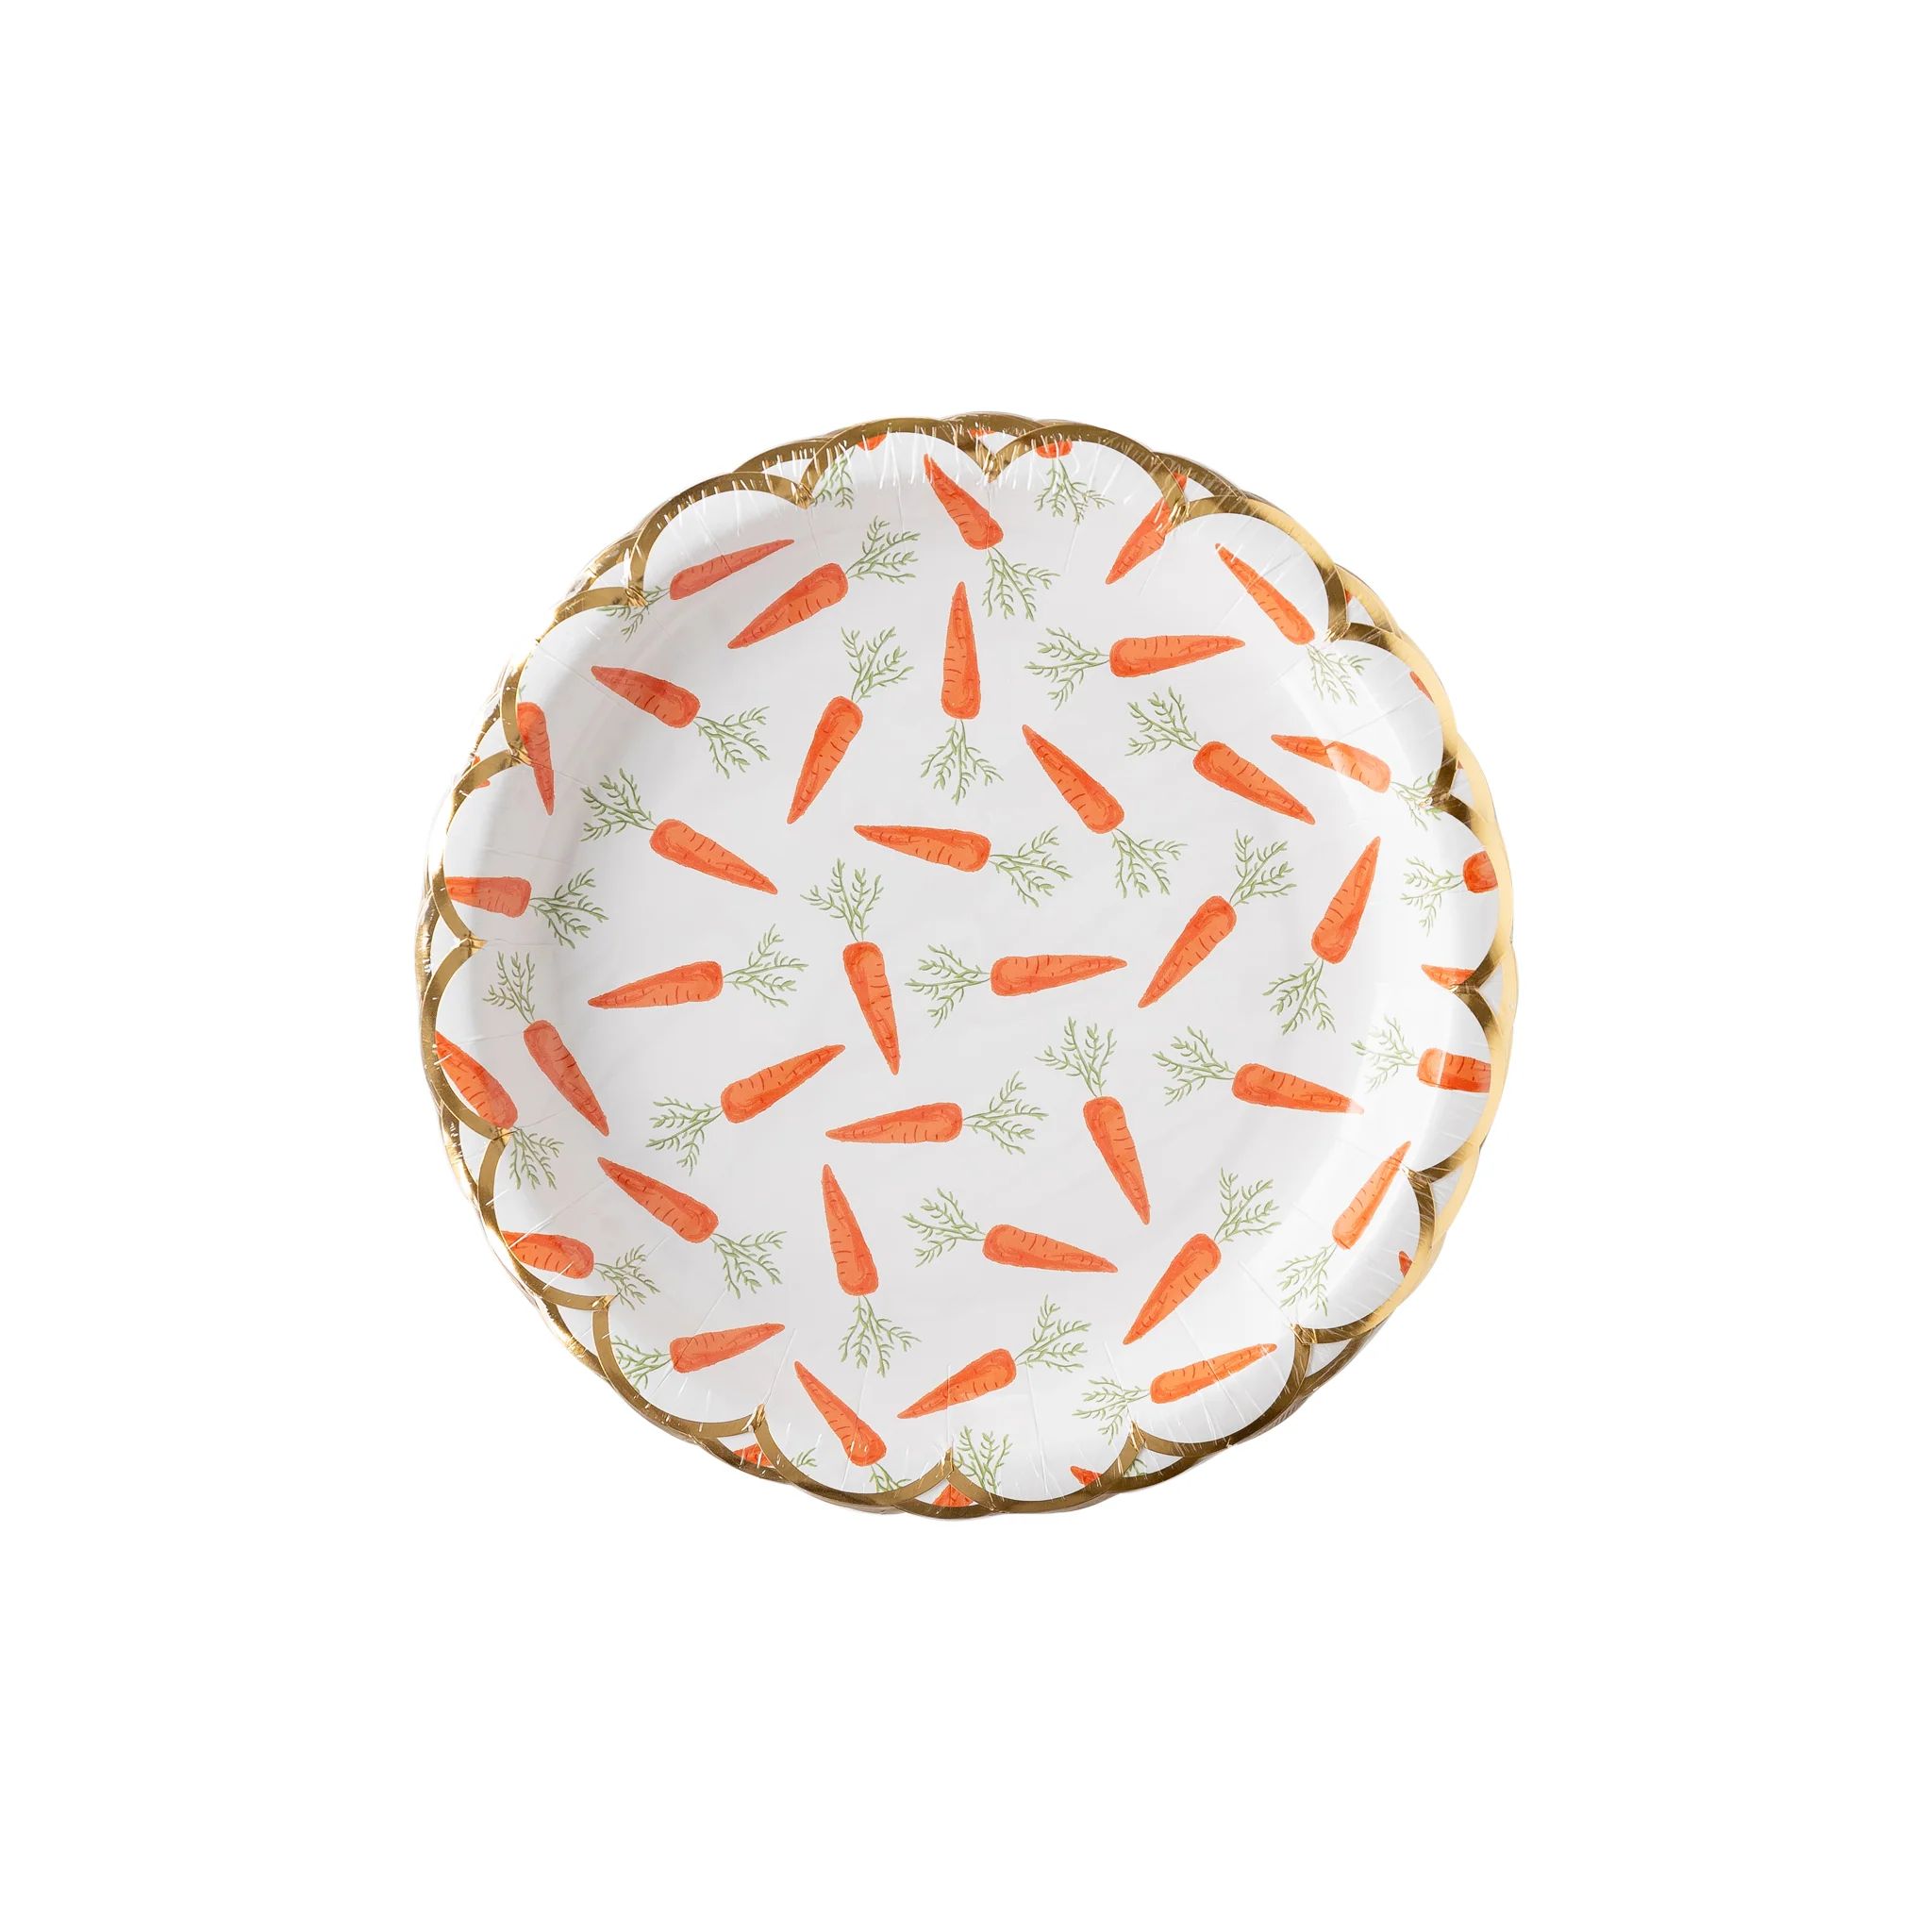 Scattered Carrots Plate | My Mind's Eye